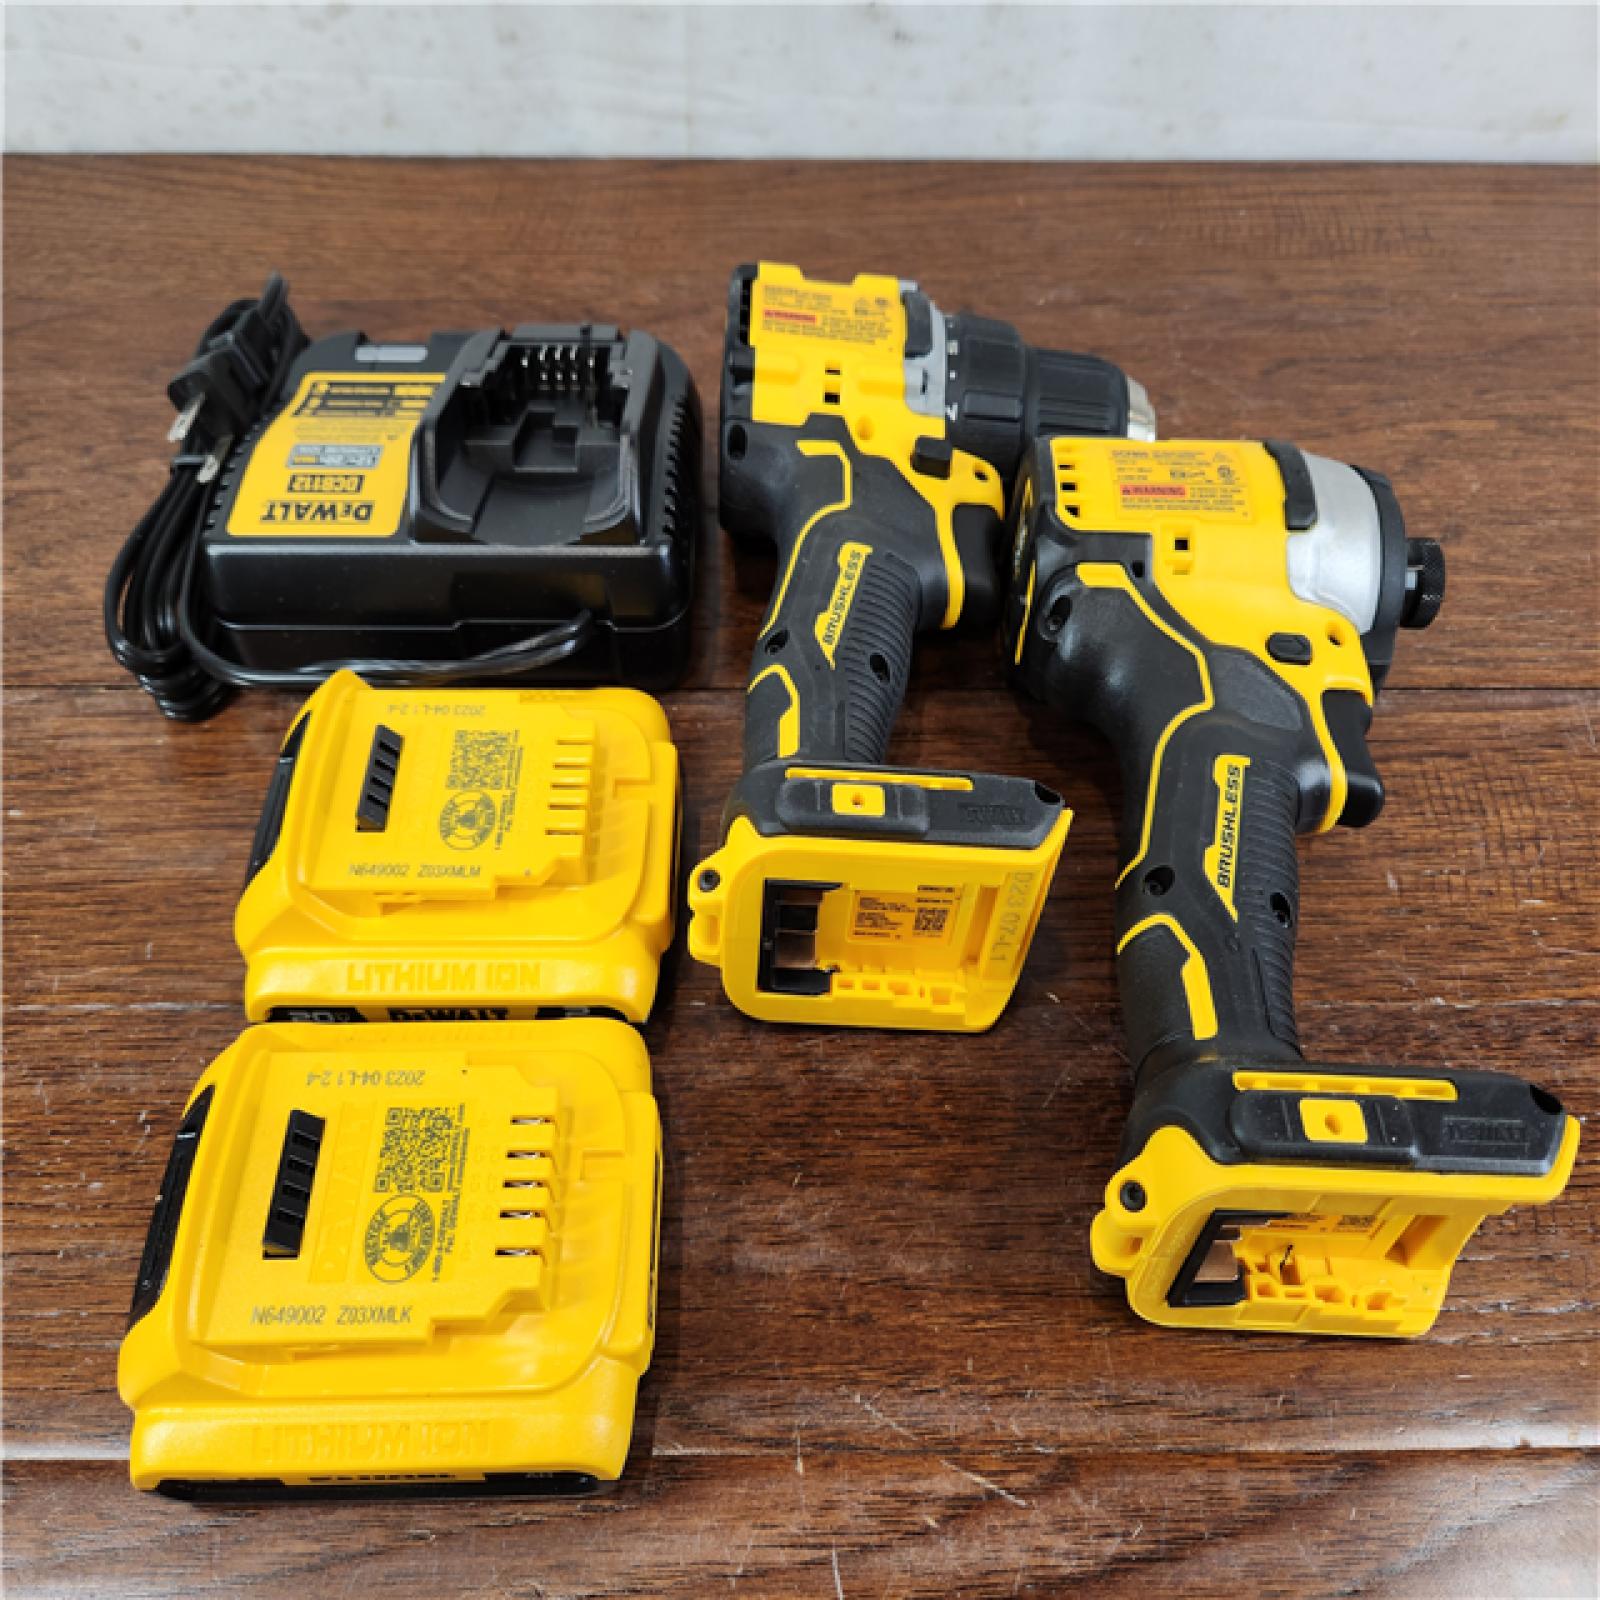 AS-IS DeWalt 20V MAX ATOMIC Cordless Brushless Compact (2-Tool) Drill and Impact Driver Kit